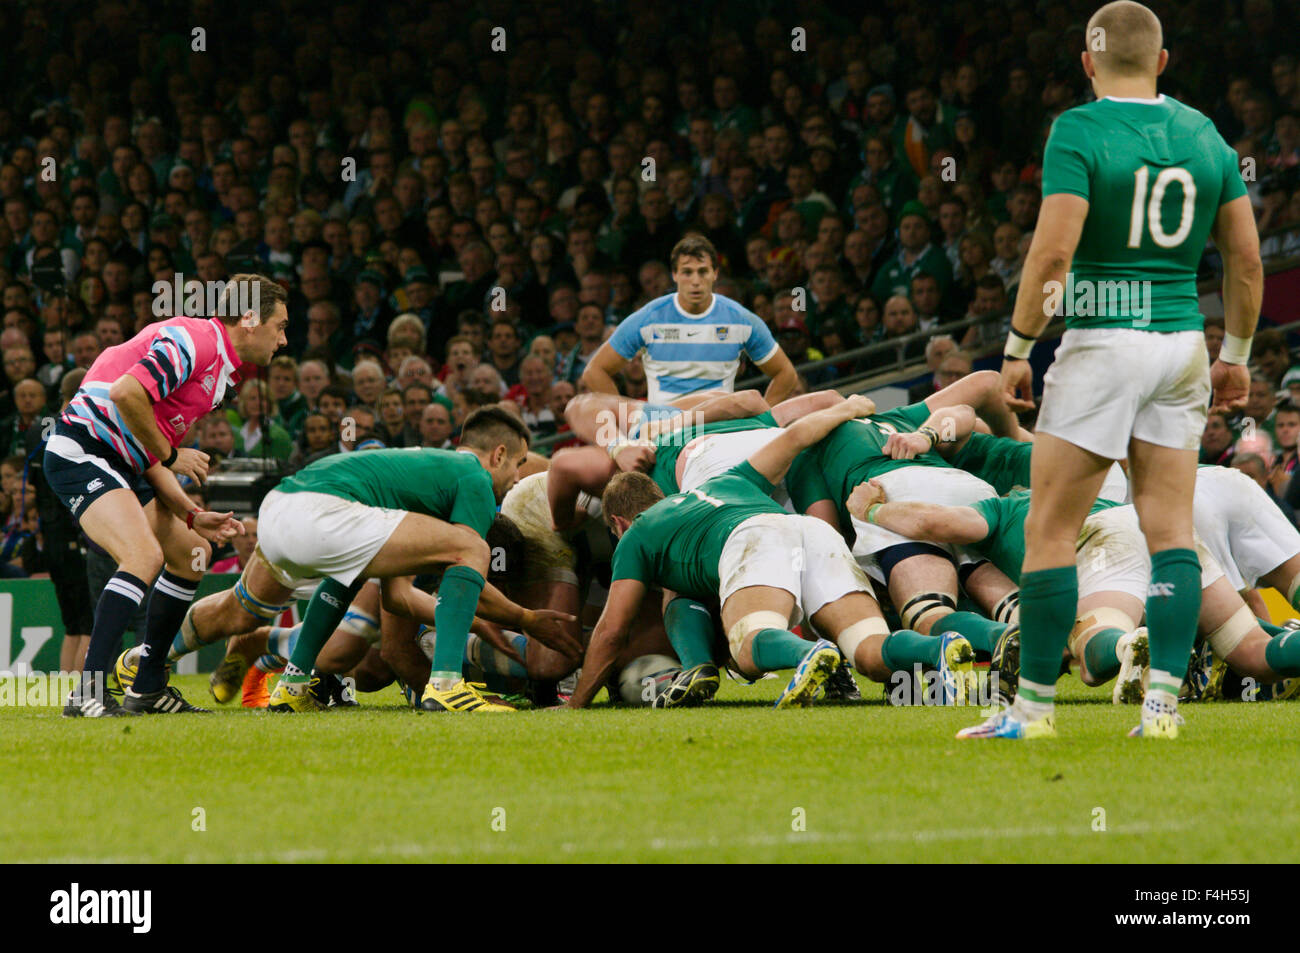 Cardiff, UK, 18 October 2015, Conor Murray, scrum half for Ireland, putting the ball into a scrum during their match against Argentina,  Credit:  Colin Edwards/Alamy Live News Stock Photo